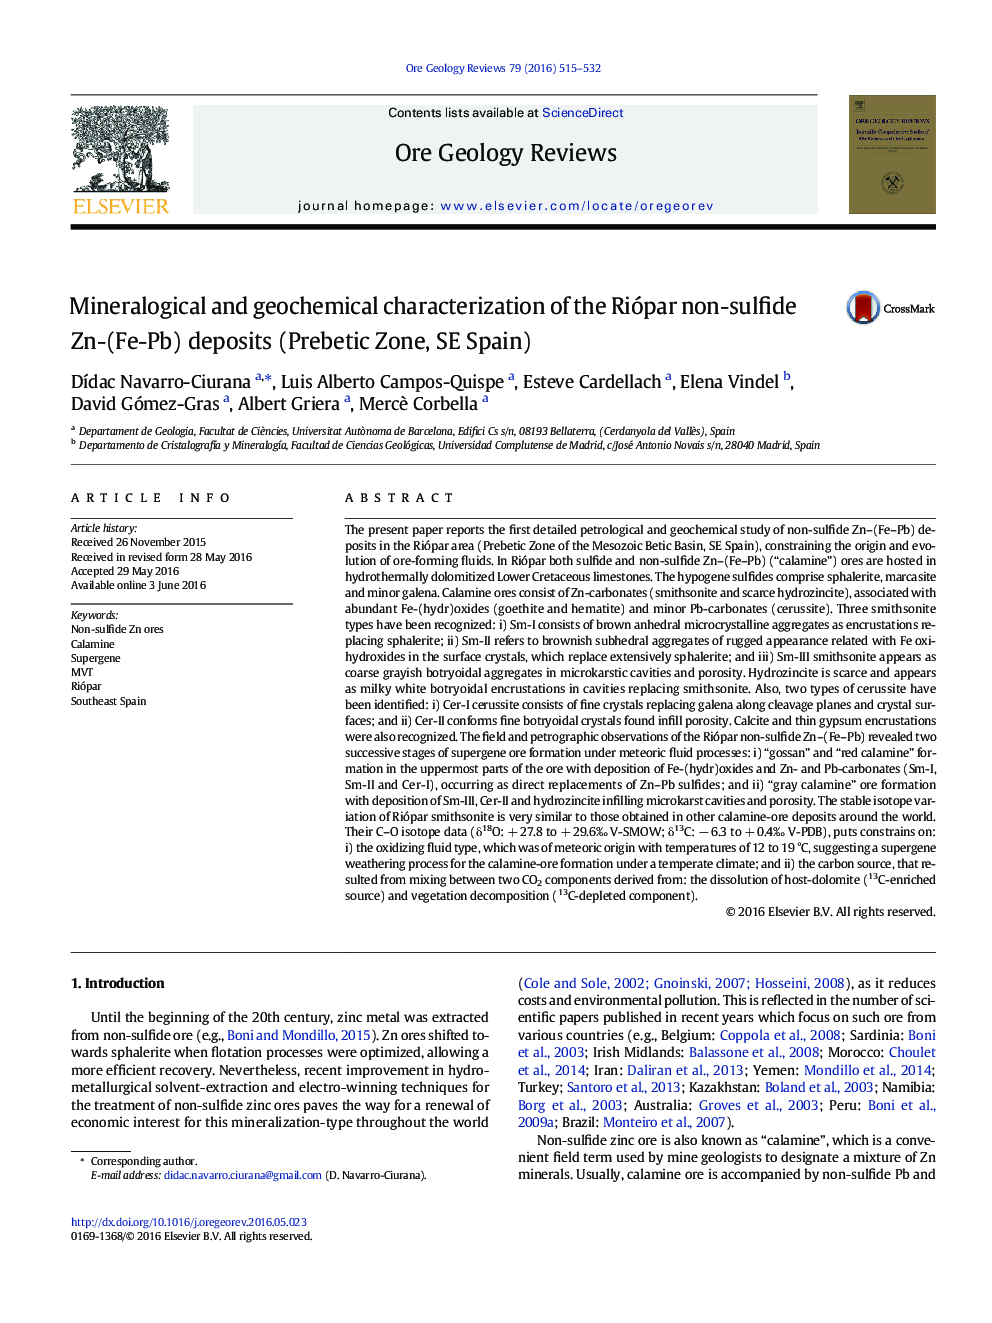 Mineralogical and geochemical characterization of the Riópar non-sulfide Zn-(Fe-Pb) deposits (Prebetic Zone, SE Spain)